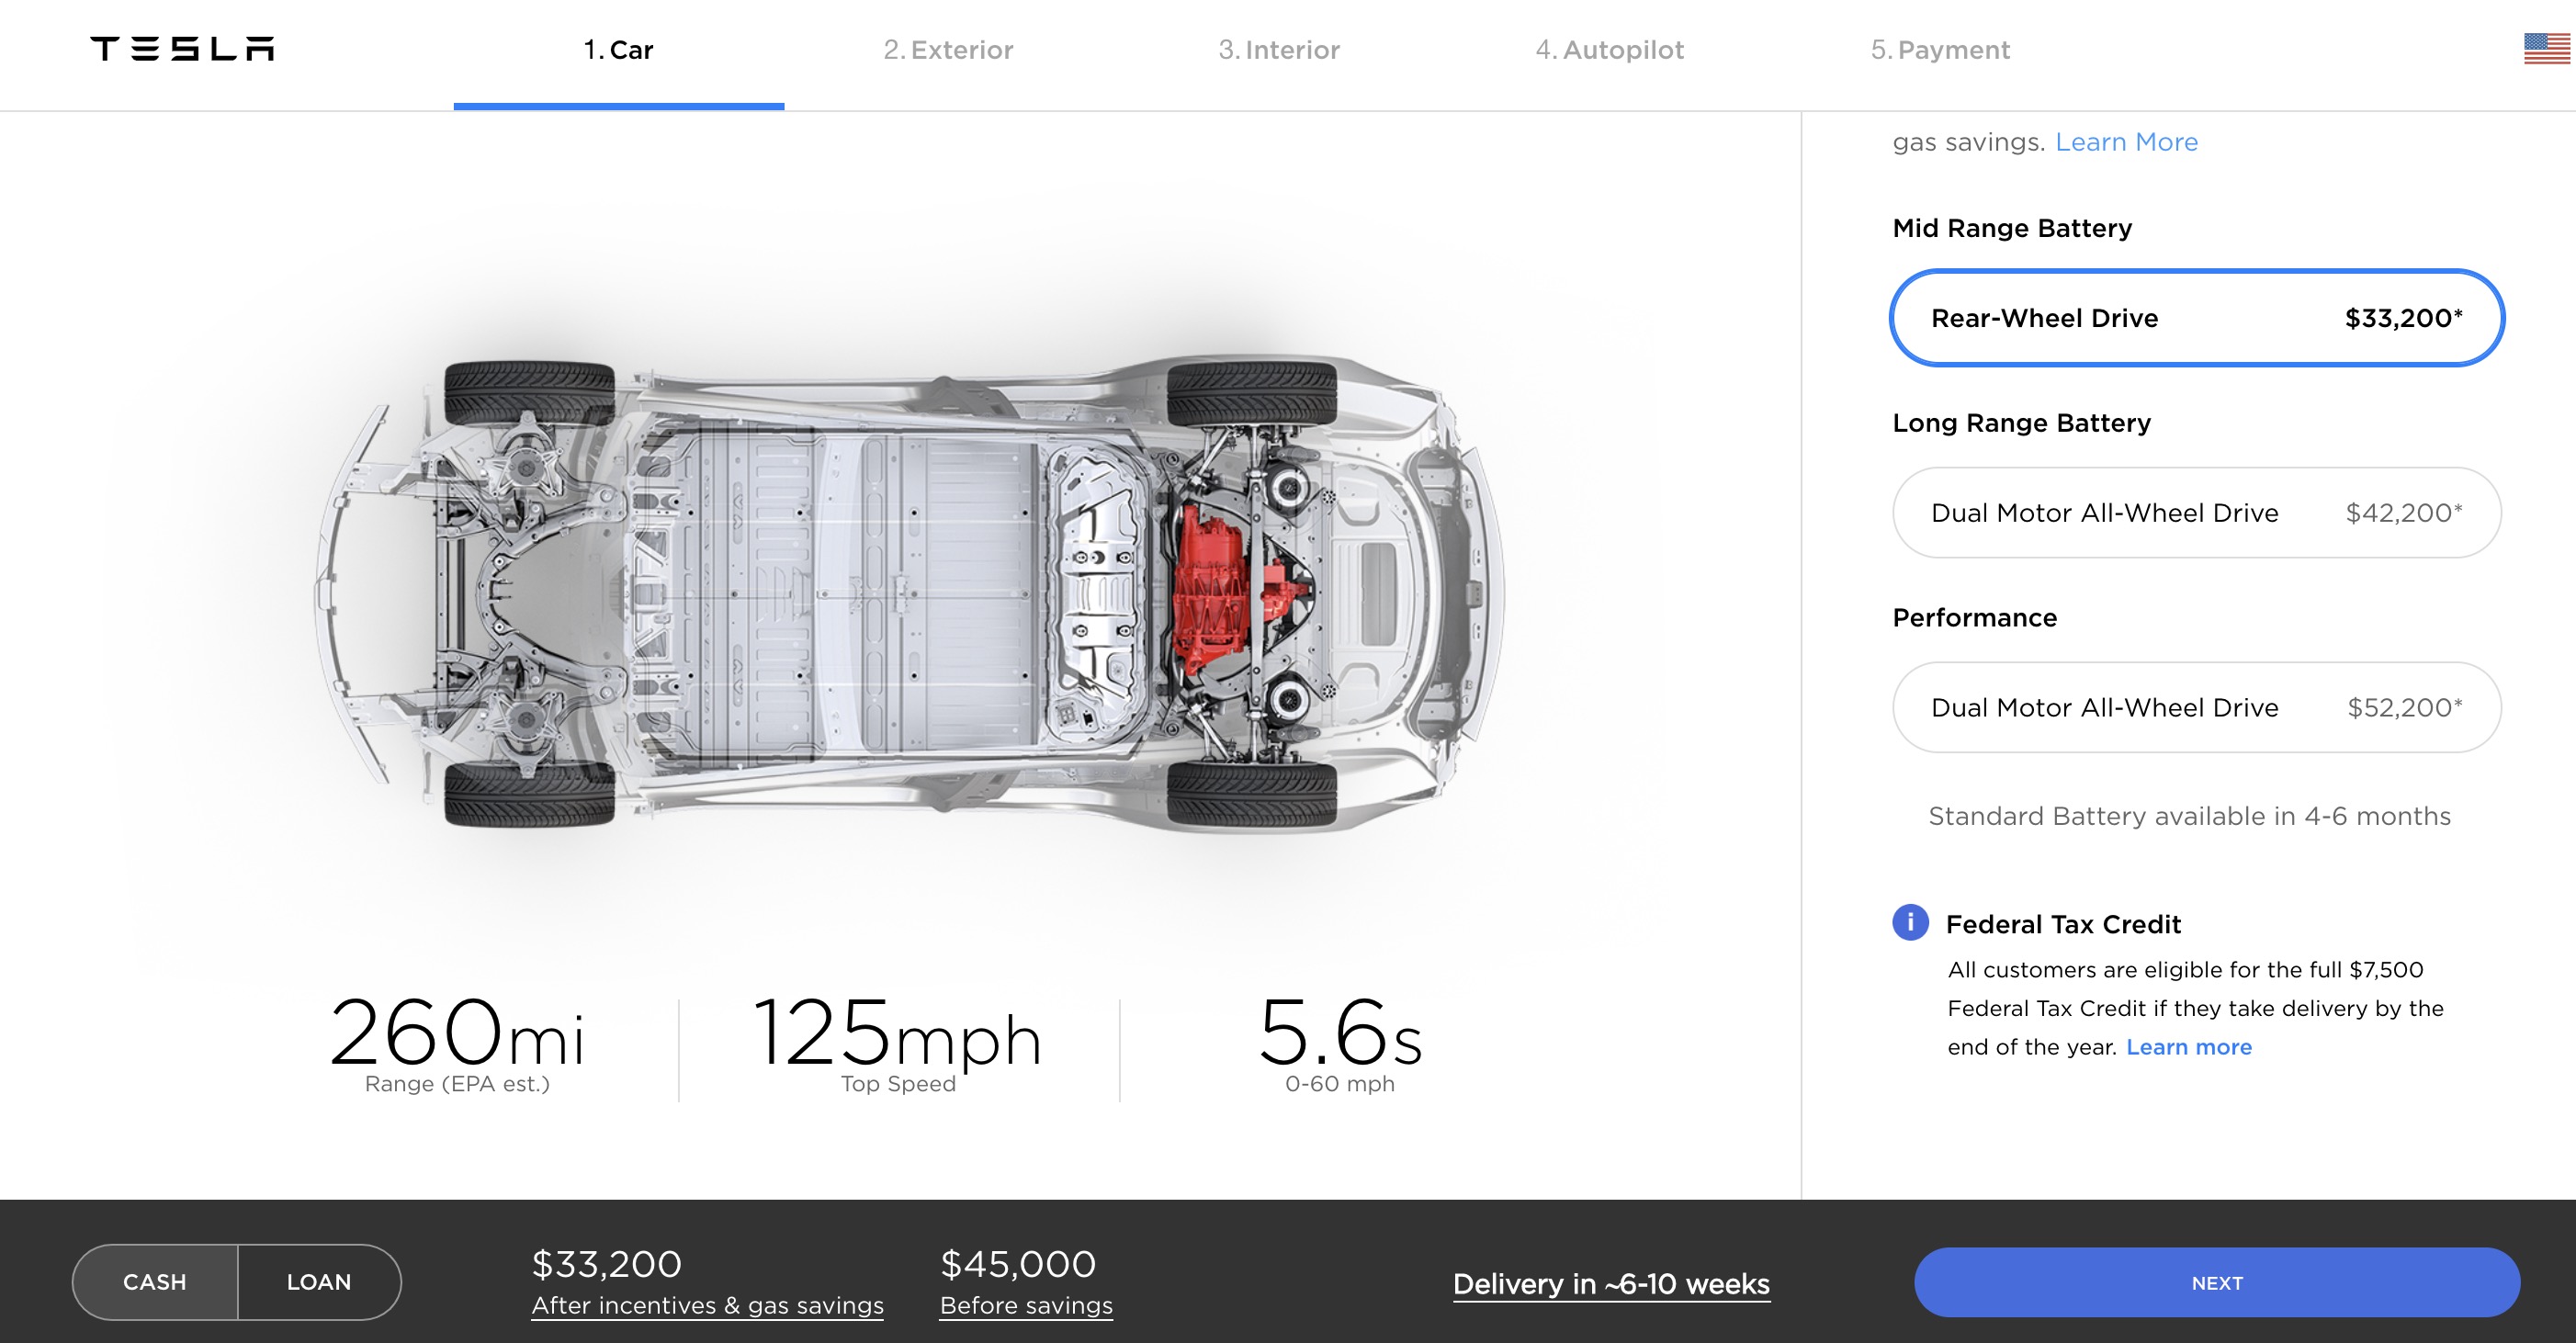 Tesla launches new Model 3 with 'midrange' battery for 45,000